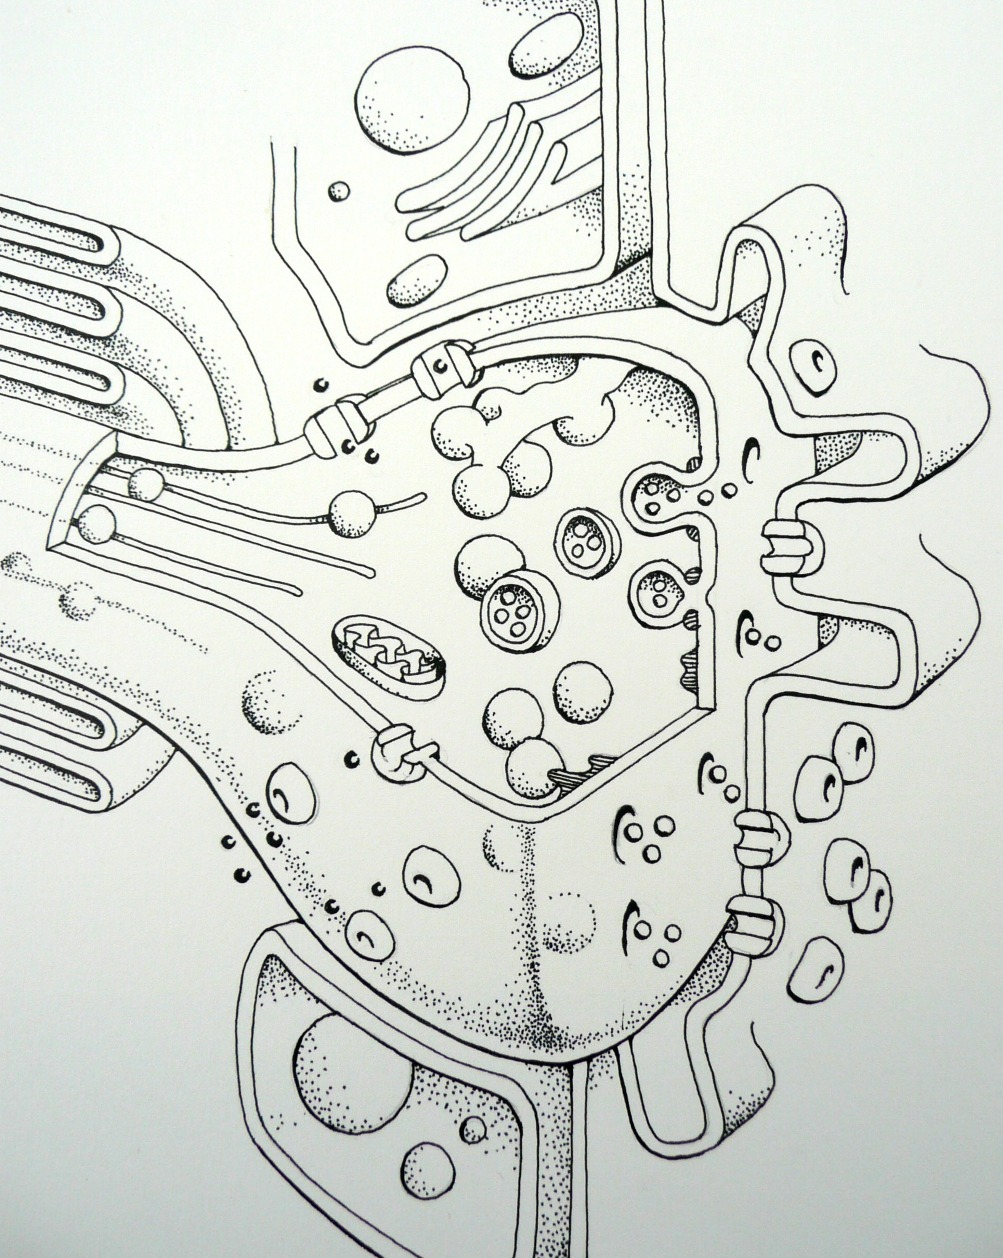 synapse pen and ink